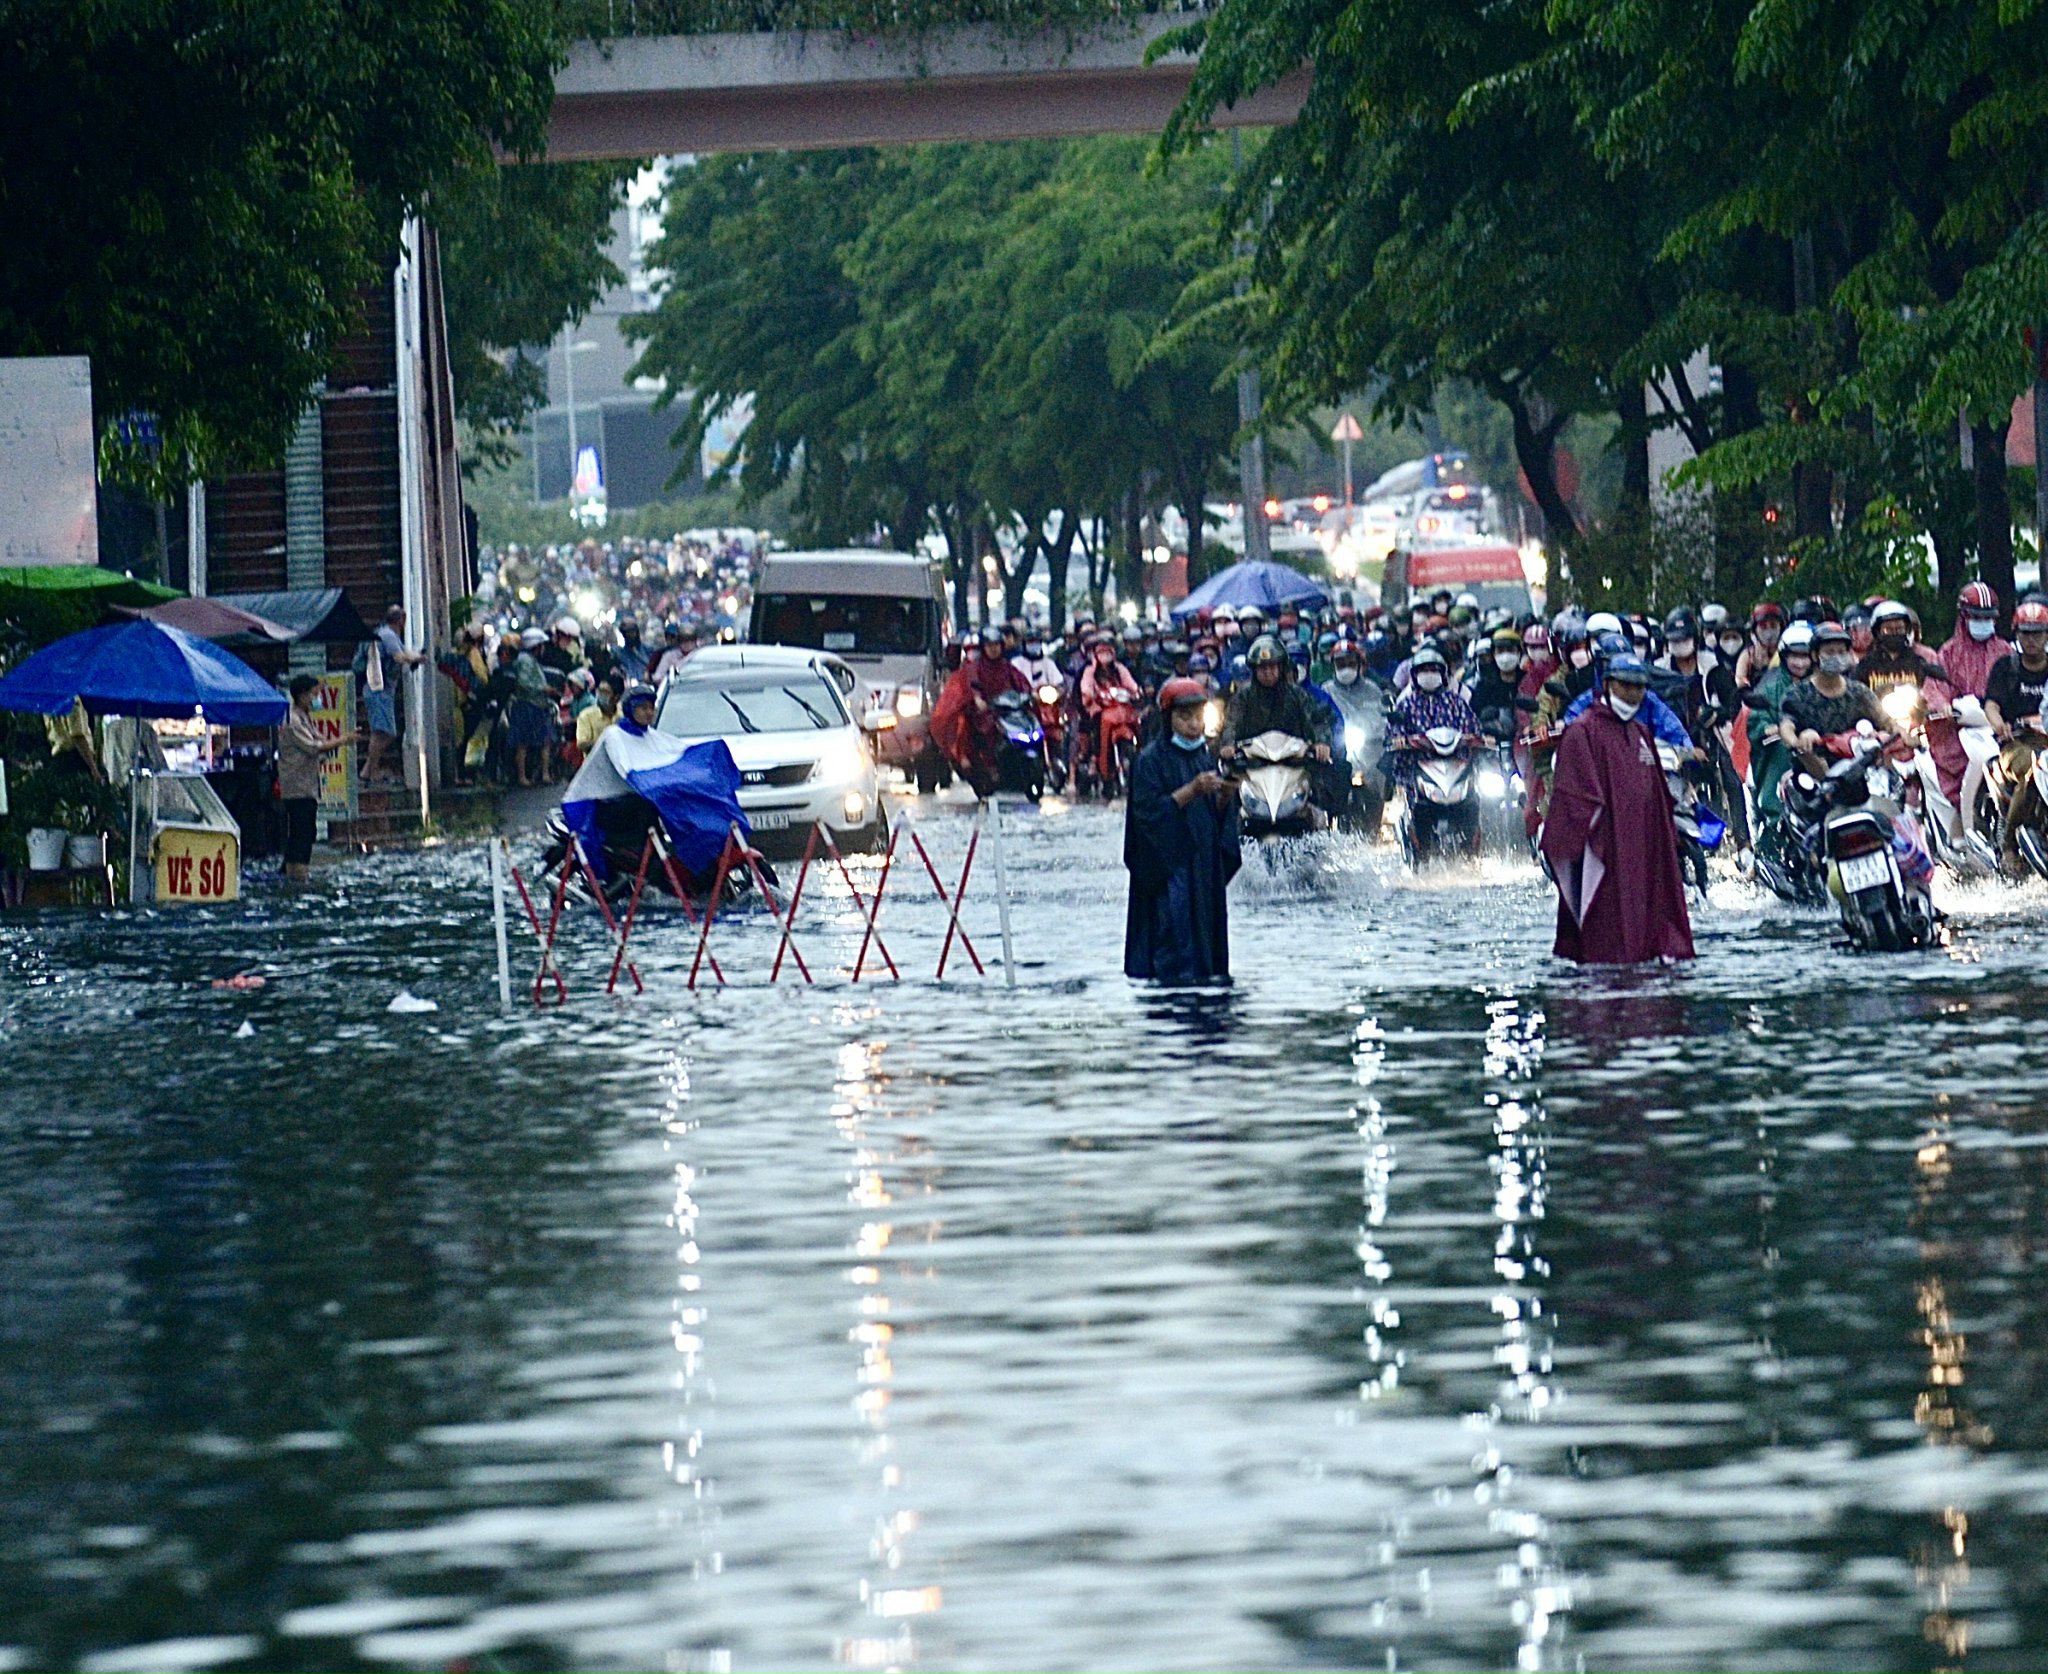 Traffic congestion on flooded Dien Bien Phu Street in Binh Thanh District, Ho Chi Minh City, June 2, 2022. Photo: T.T.D. / Tuoi Tre